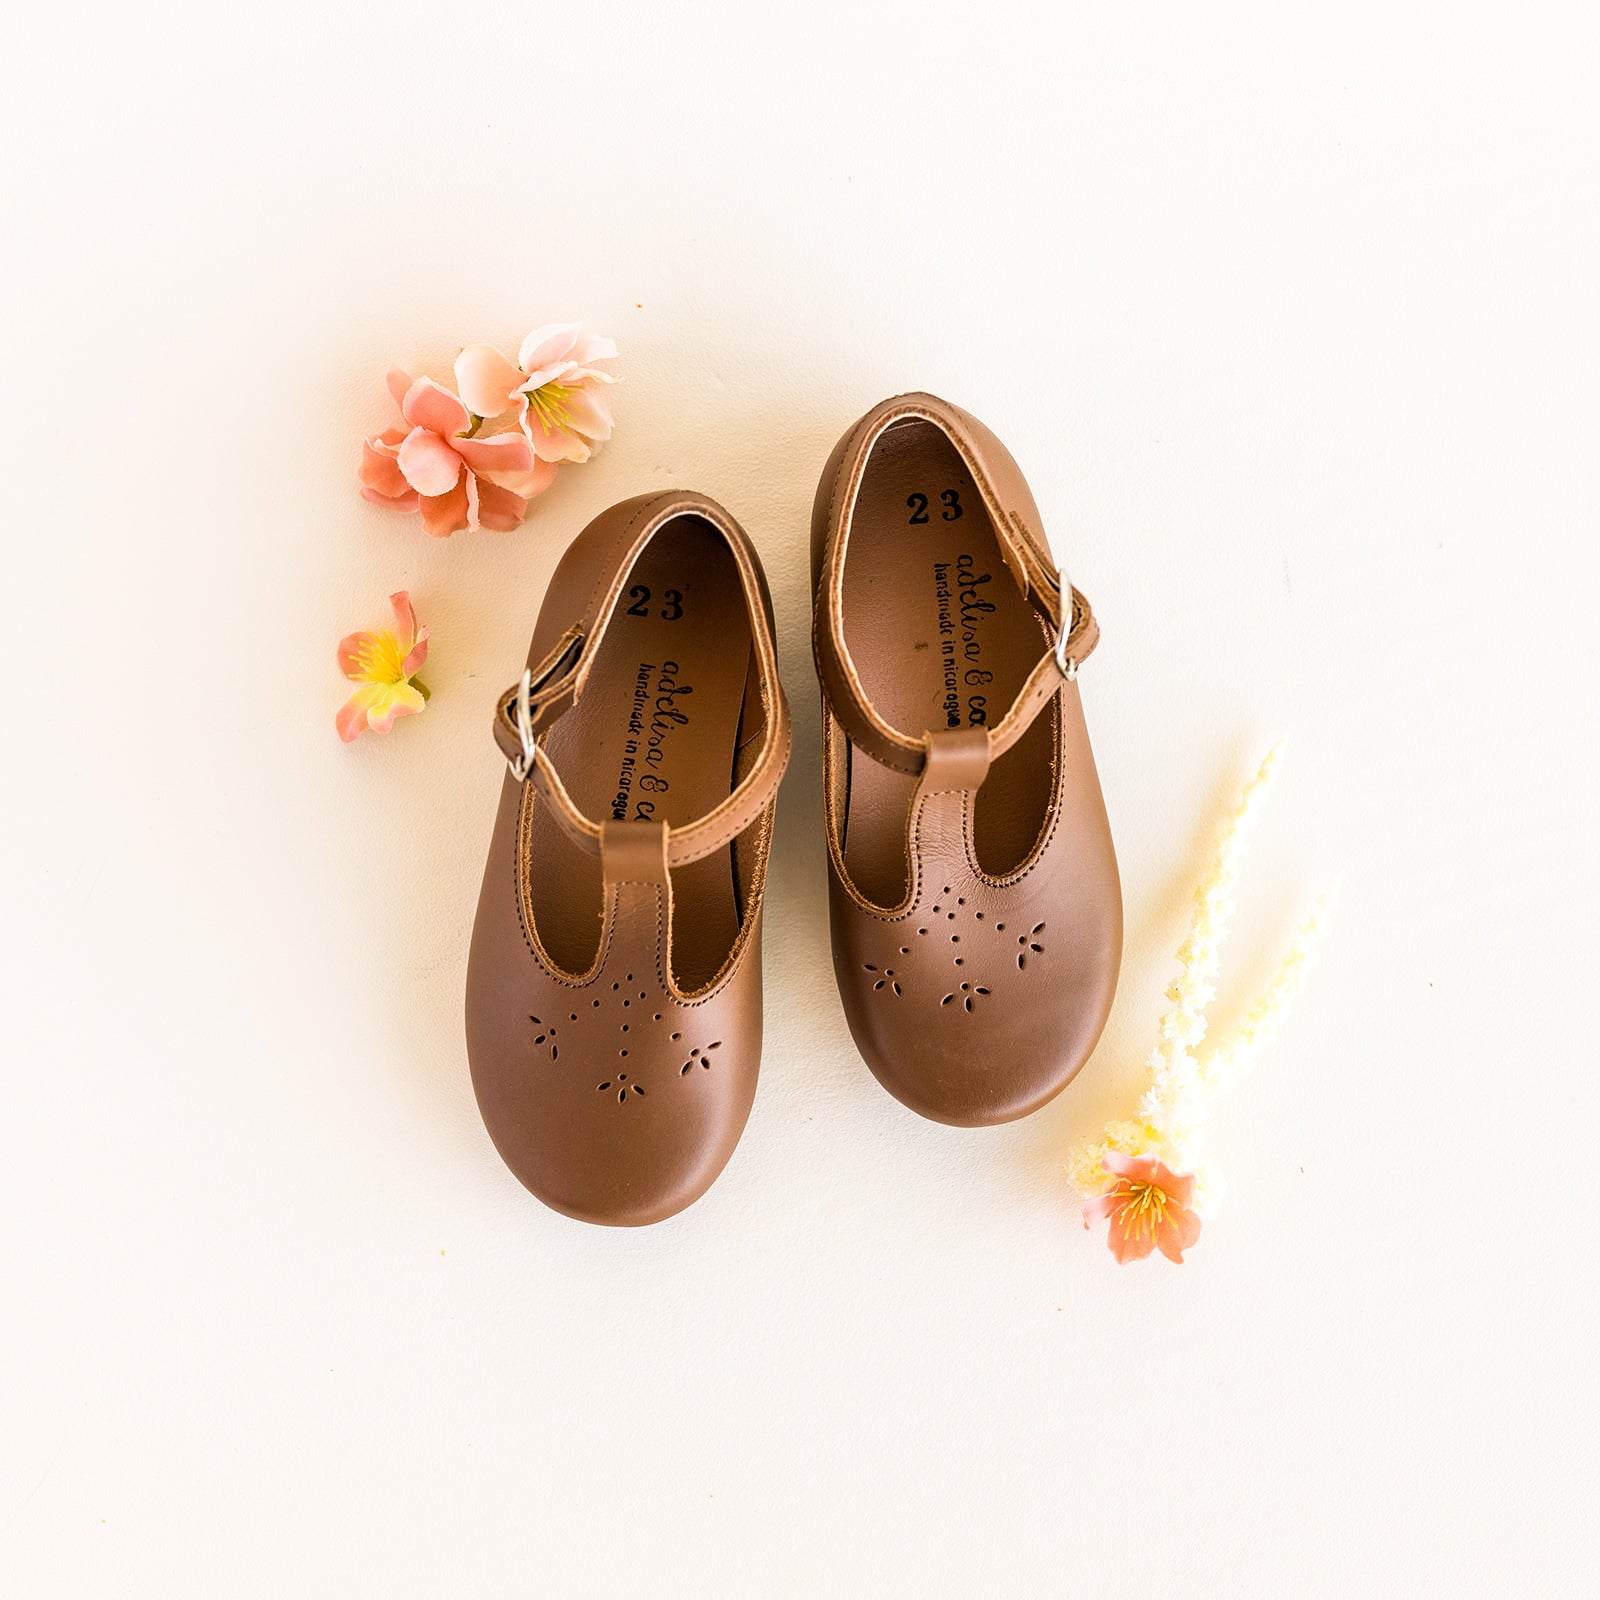 Adelisa & Co t-bar Mary Janes with delicate floral detailing in medium brown leather. These leather Mary Jane shoes for girls are handmade and feature a buckle closure. 